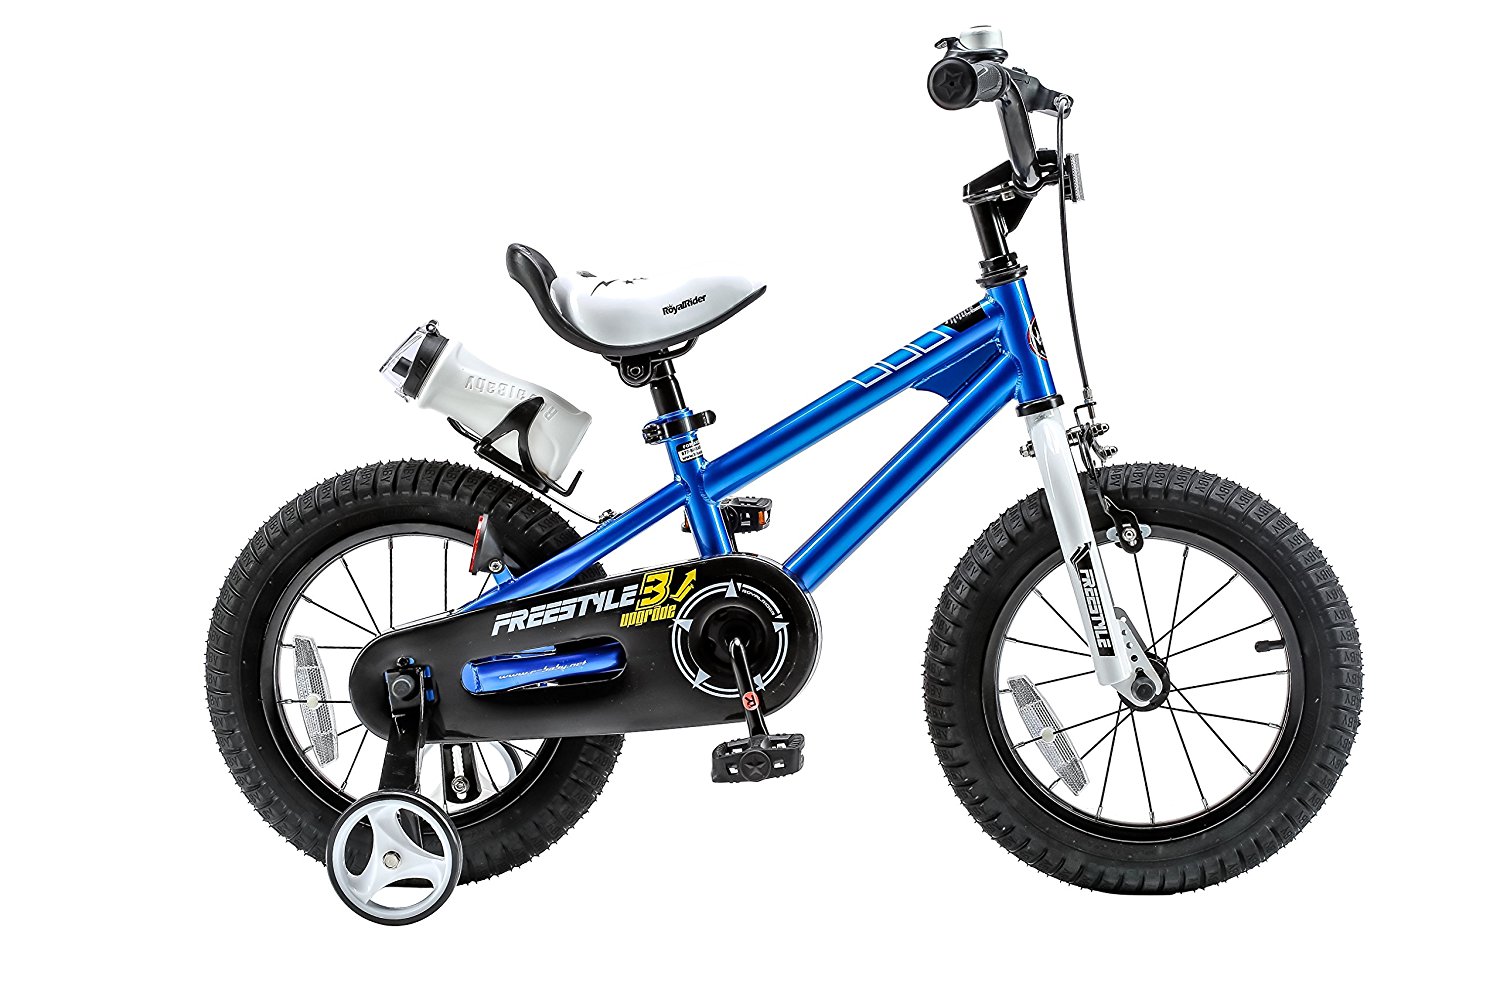 Review of RoyalBaby BMX Freestyle Kid's Bike, 12-14-16-18 inch wheels, six colors available